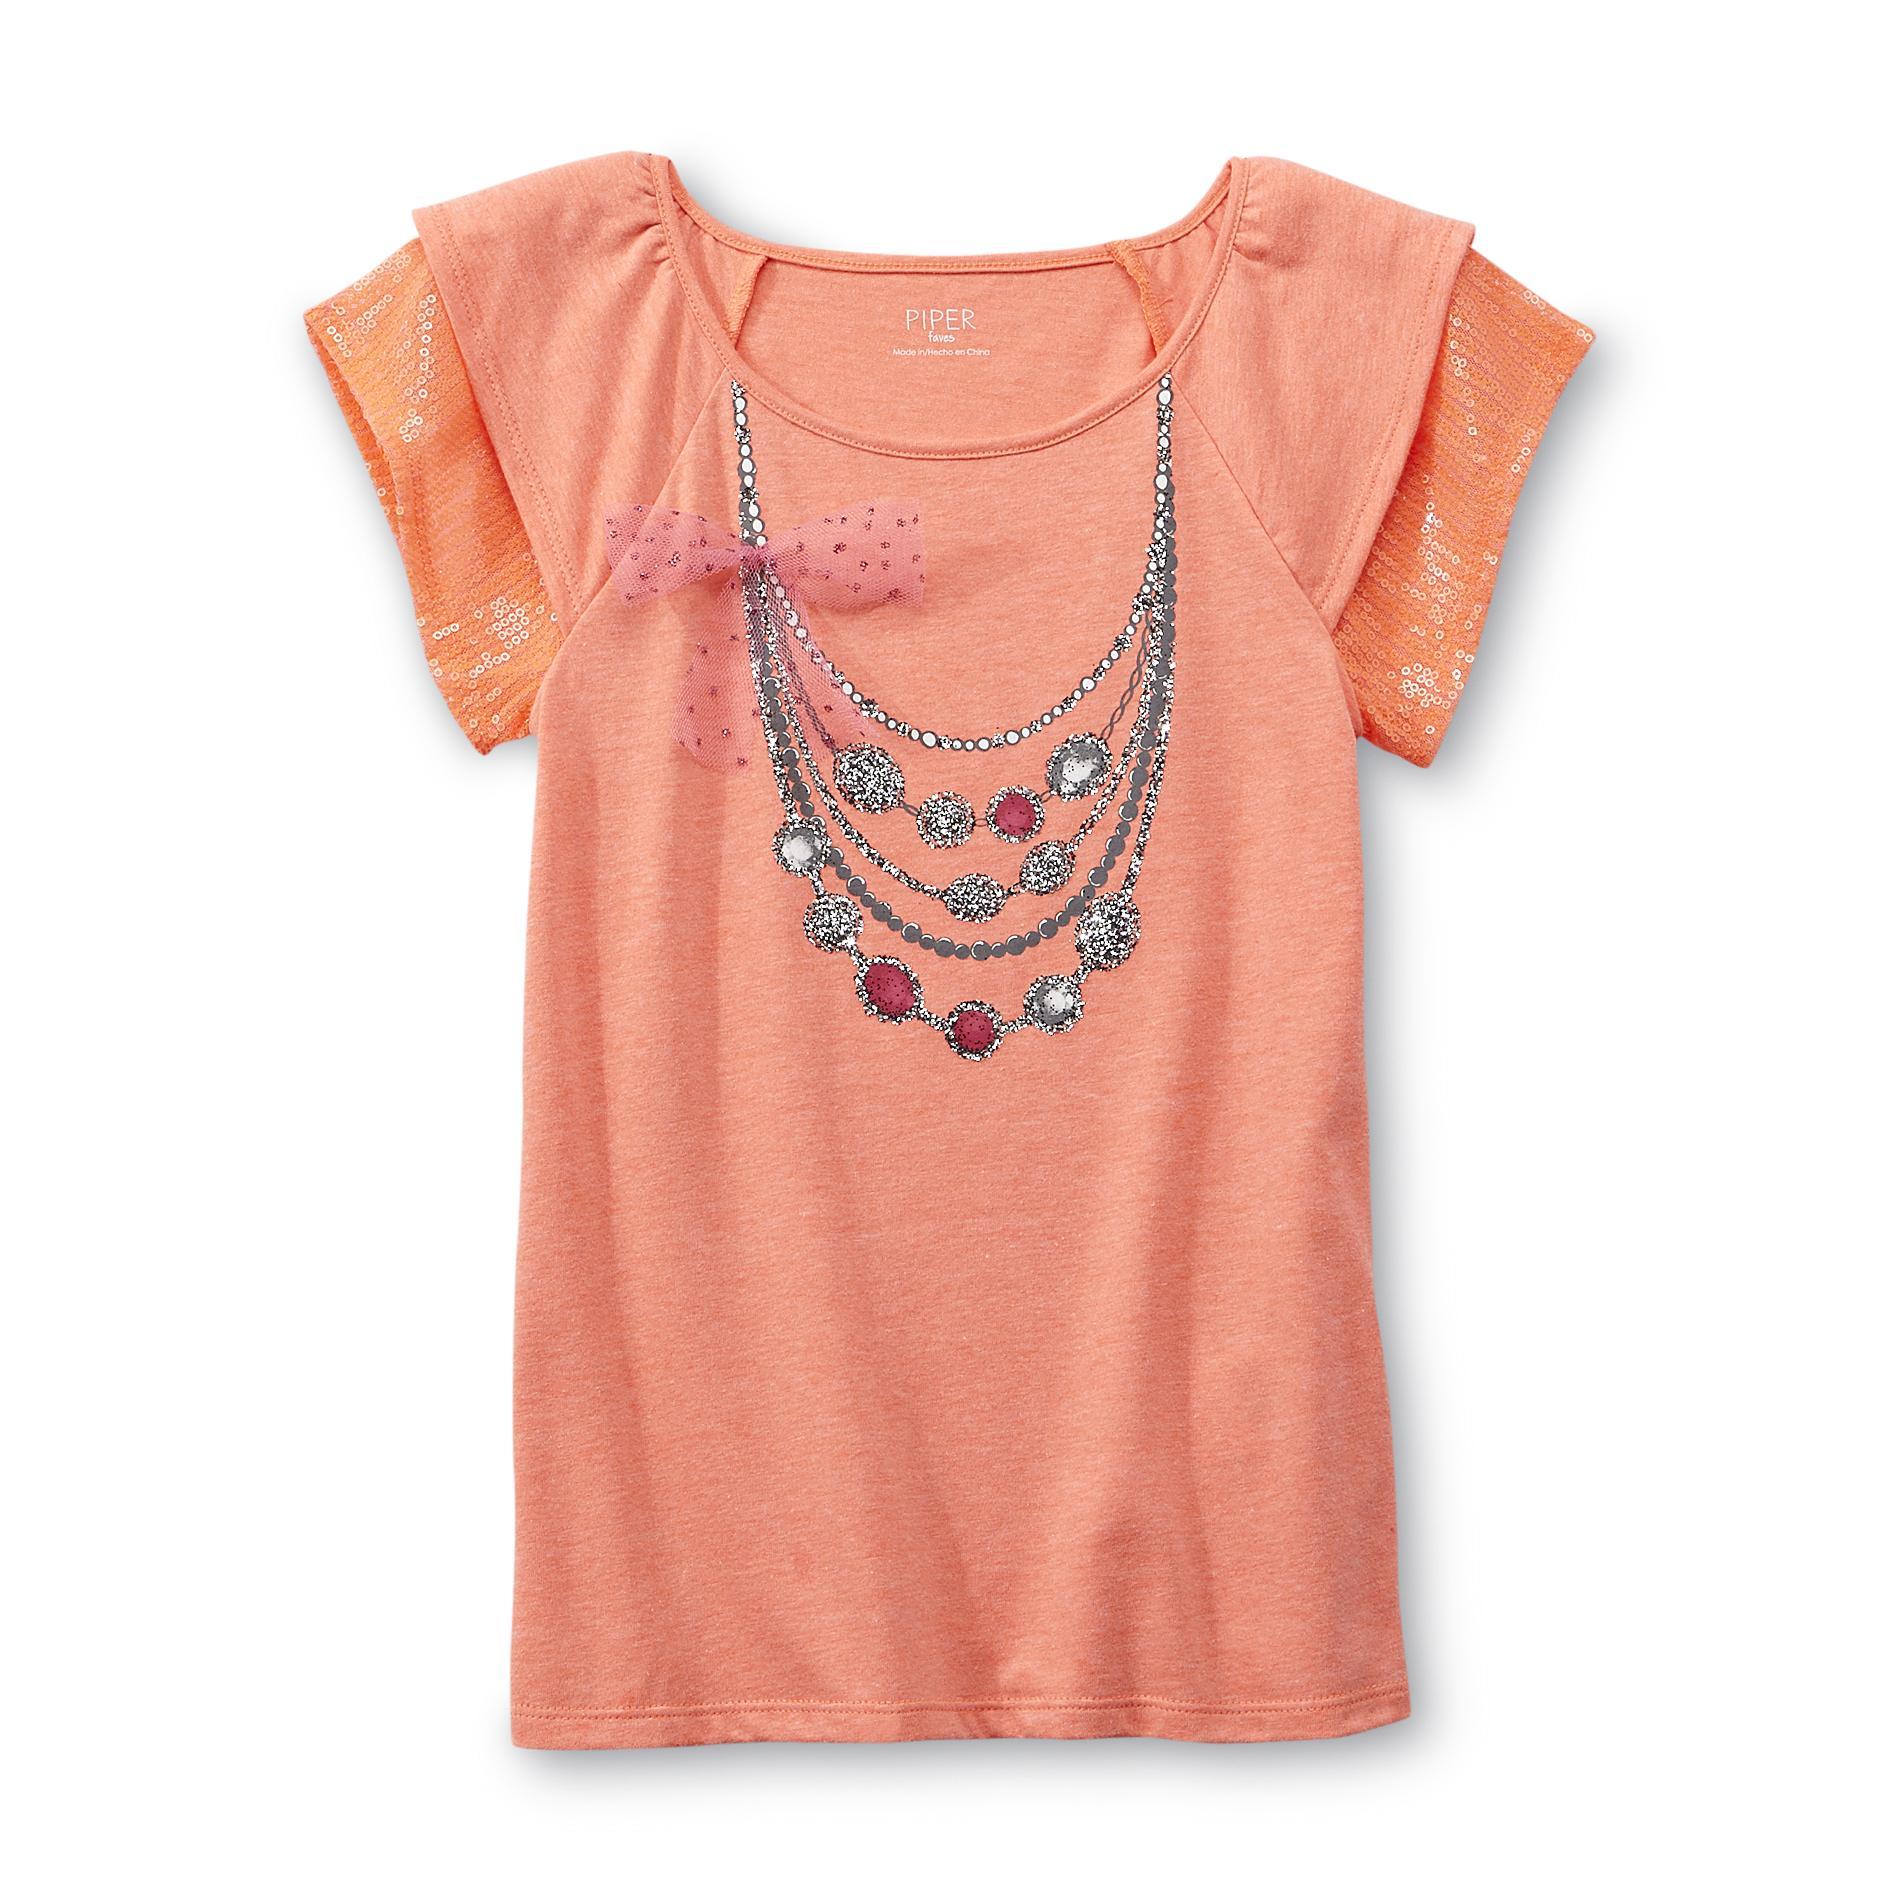 Piper Girl's Sequined Top - Necklace